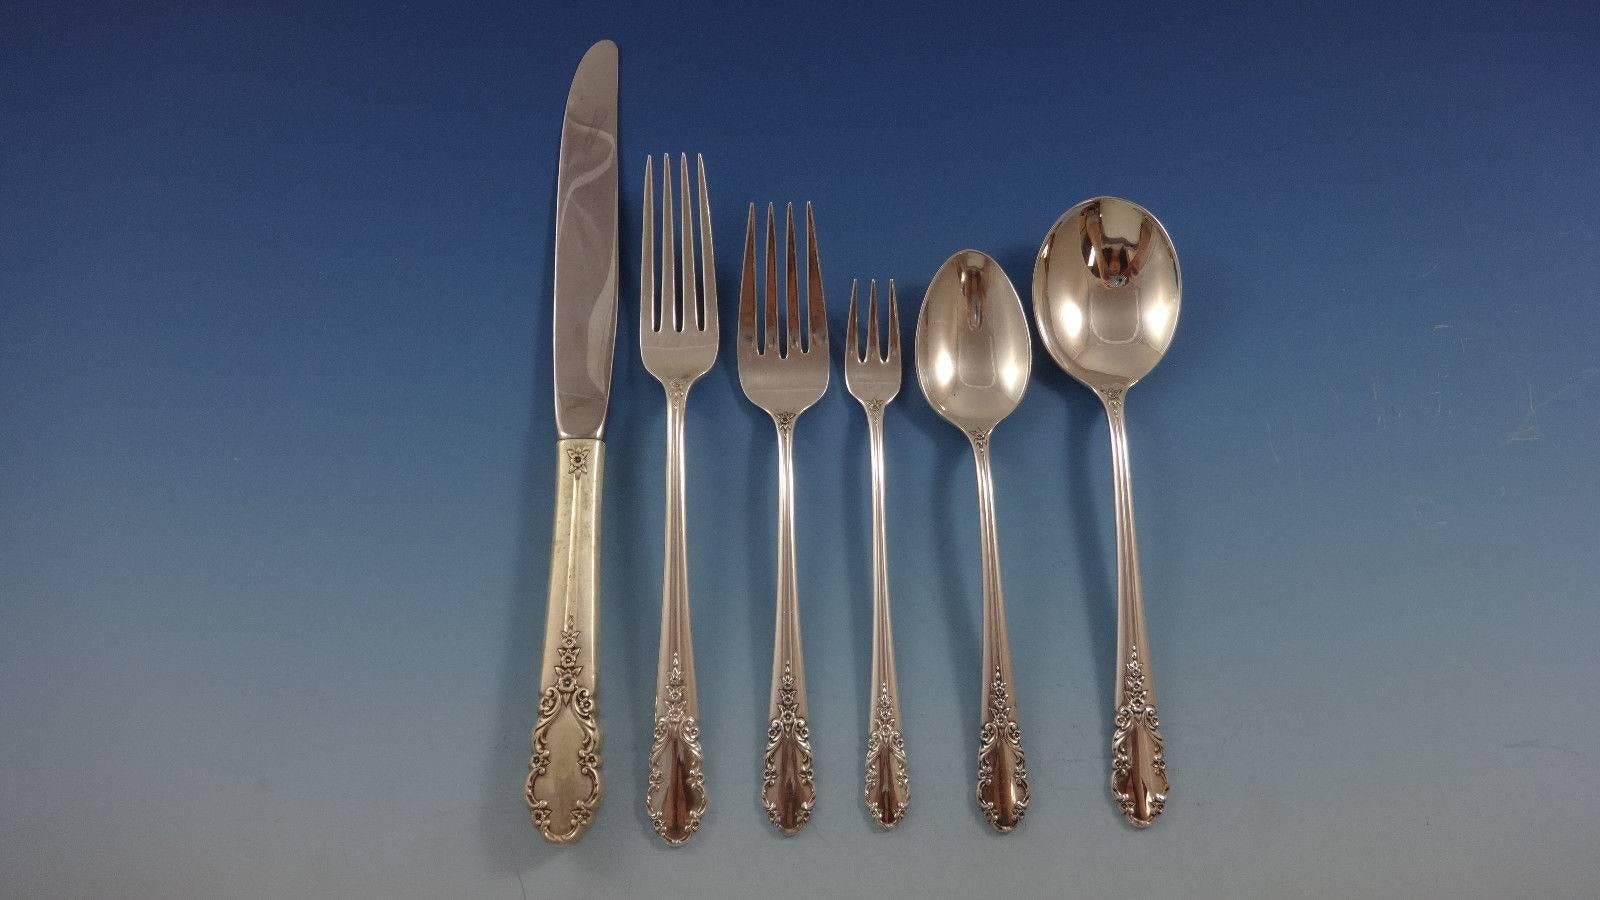 Bridal Veil by International sterling silver flatware set, 79 pieces. This set includes:

12 knives, 9 1/4